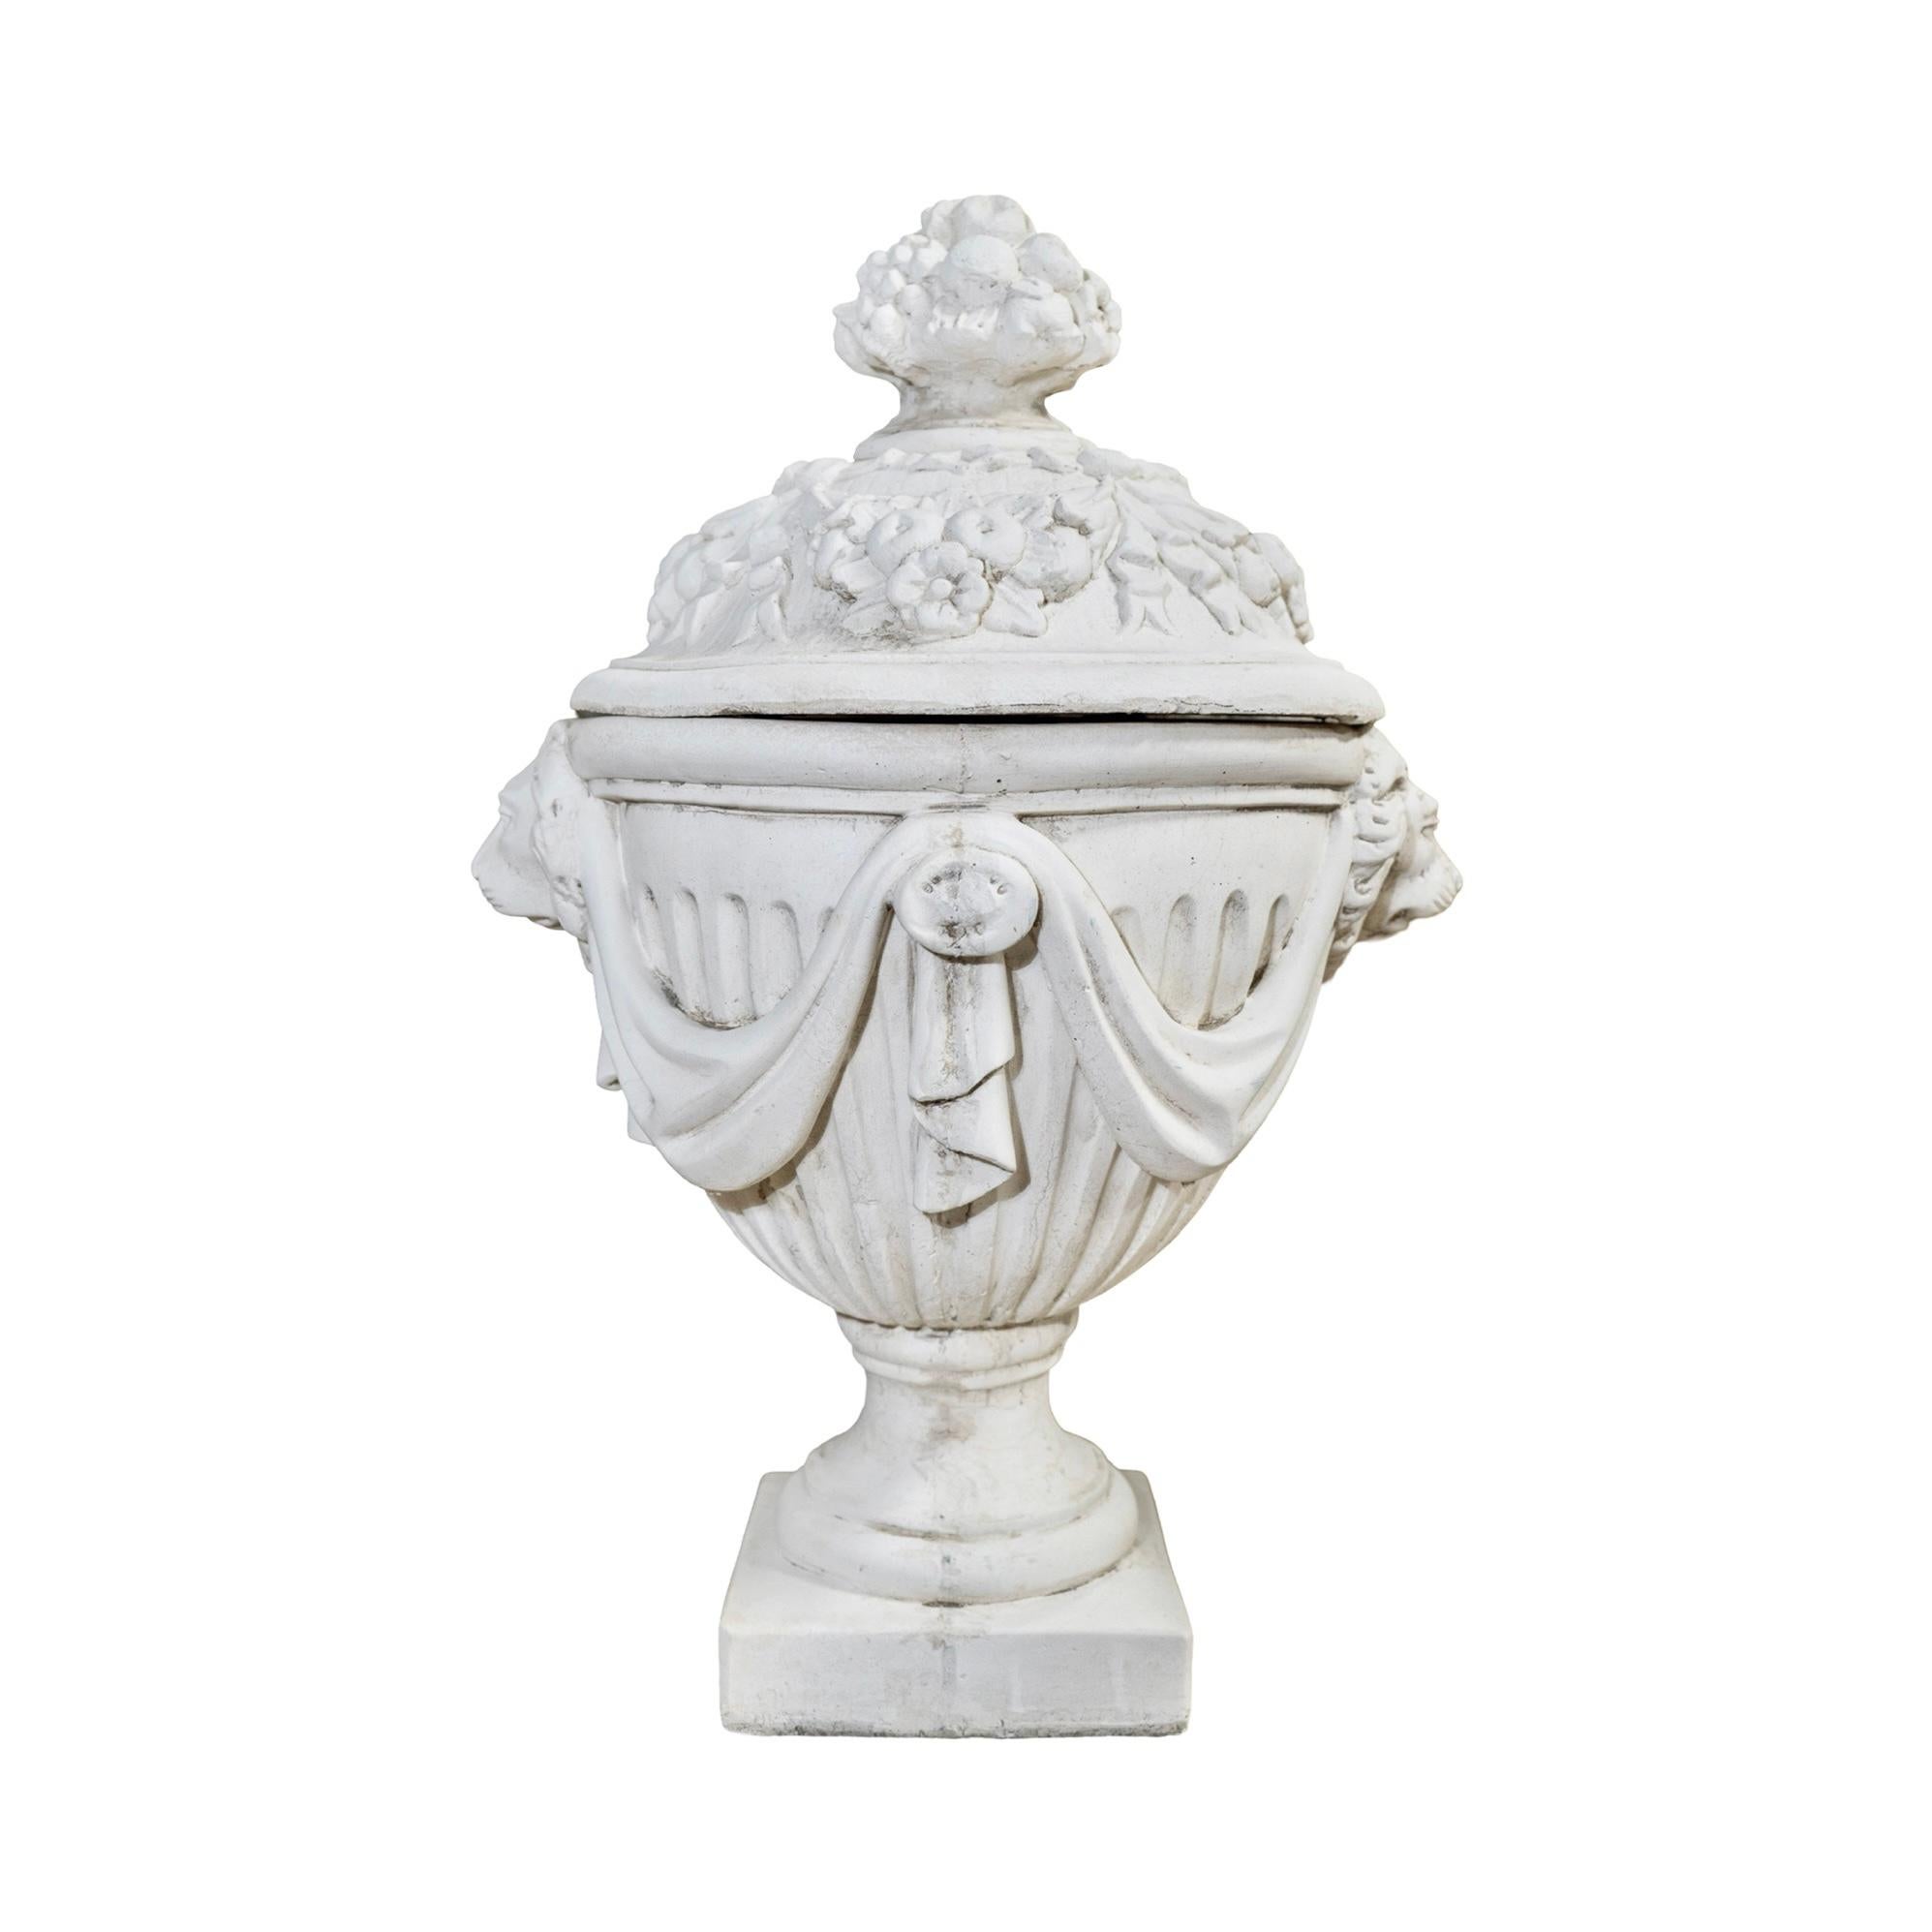 The French Decor Urn is a mid-century contemporary planter from France. Its intricate style carvings, fluted design, and swag style carvings make it a beautiful addition to any garden or outdoor space. Made with a composite stone material, this urn